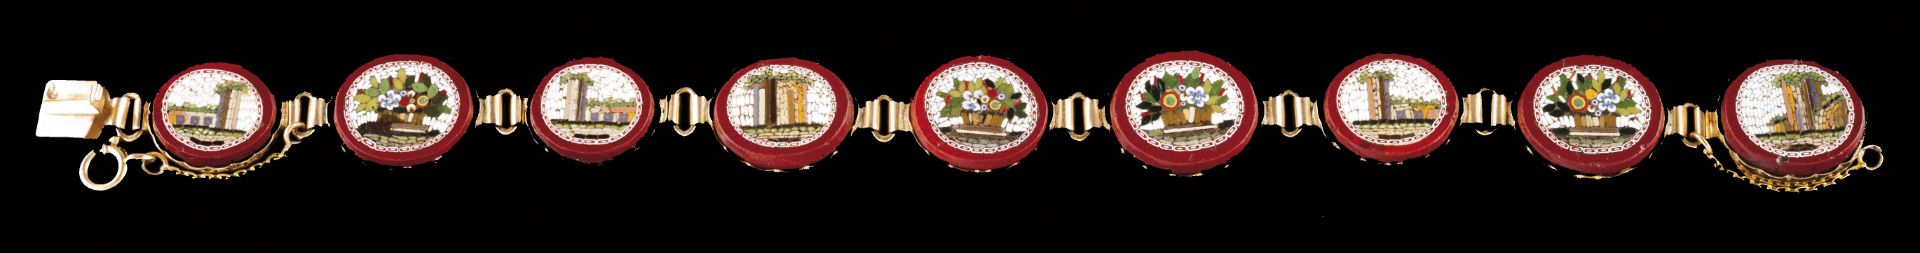 A braceletPortuguese gold Articulated links set with micro mosaic plaques with flowers and buildings